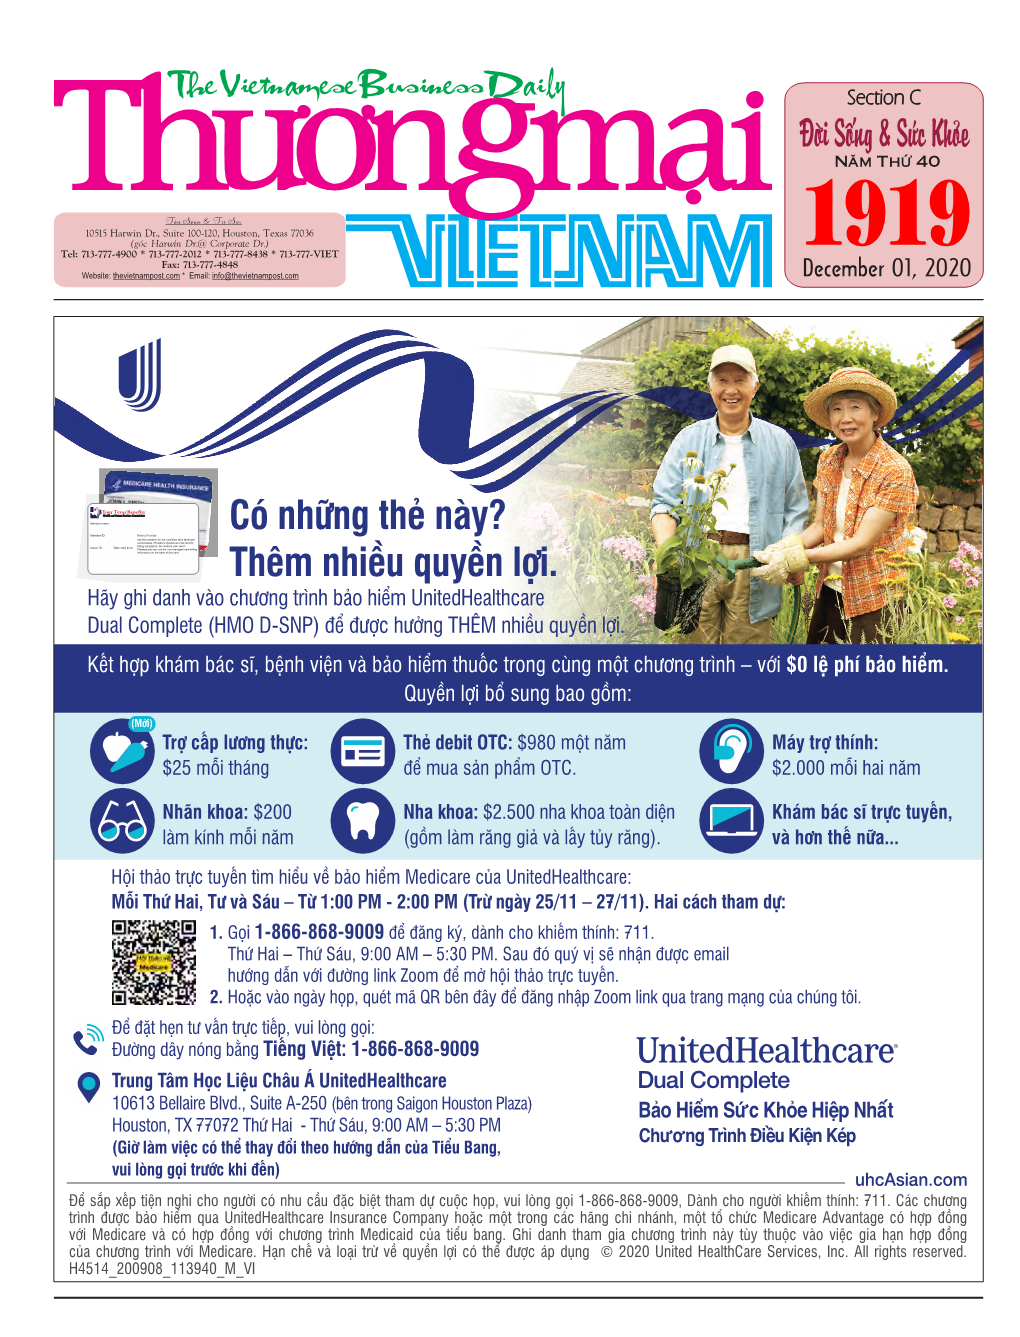 The Vietnamese Business Daily Section C